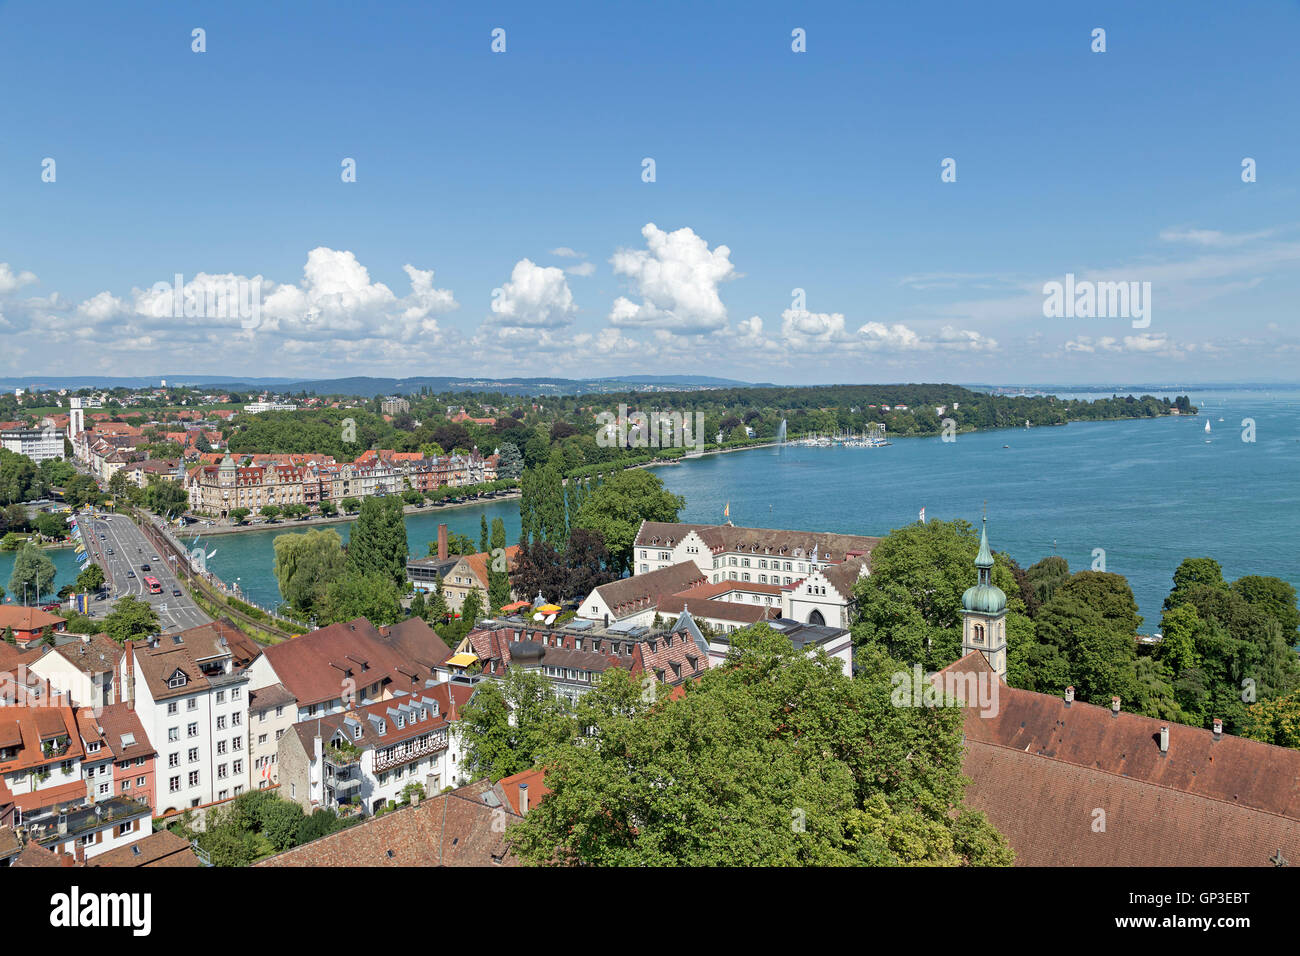 panoramic view of old town and lake from the tower of the minster, Constance, Lake Constance, Baden-Wuerttemberg, Germany Stock Photo